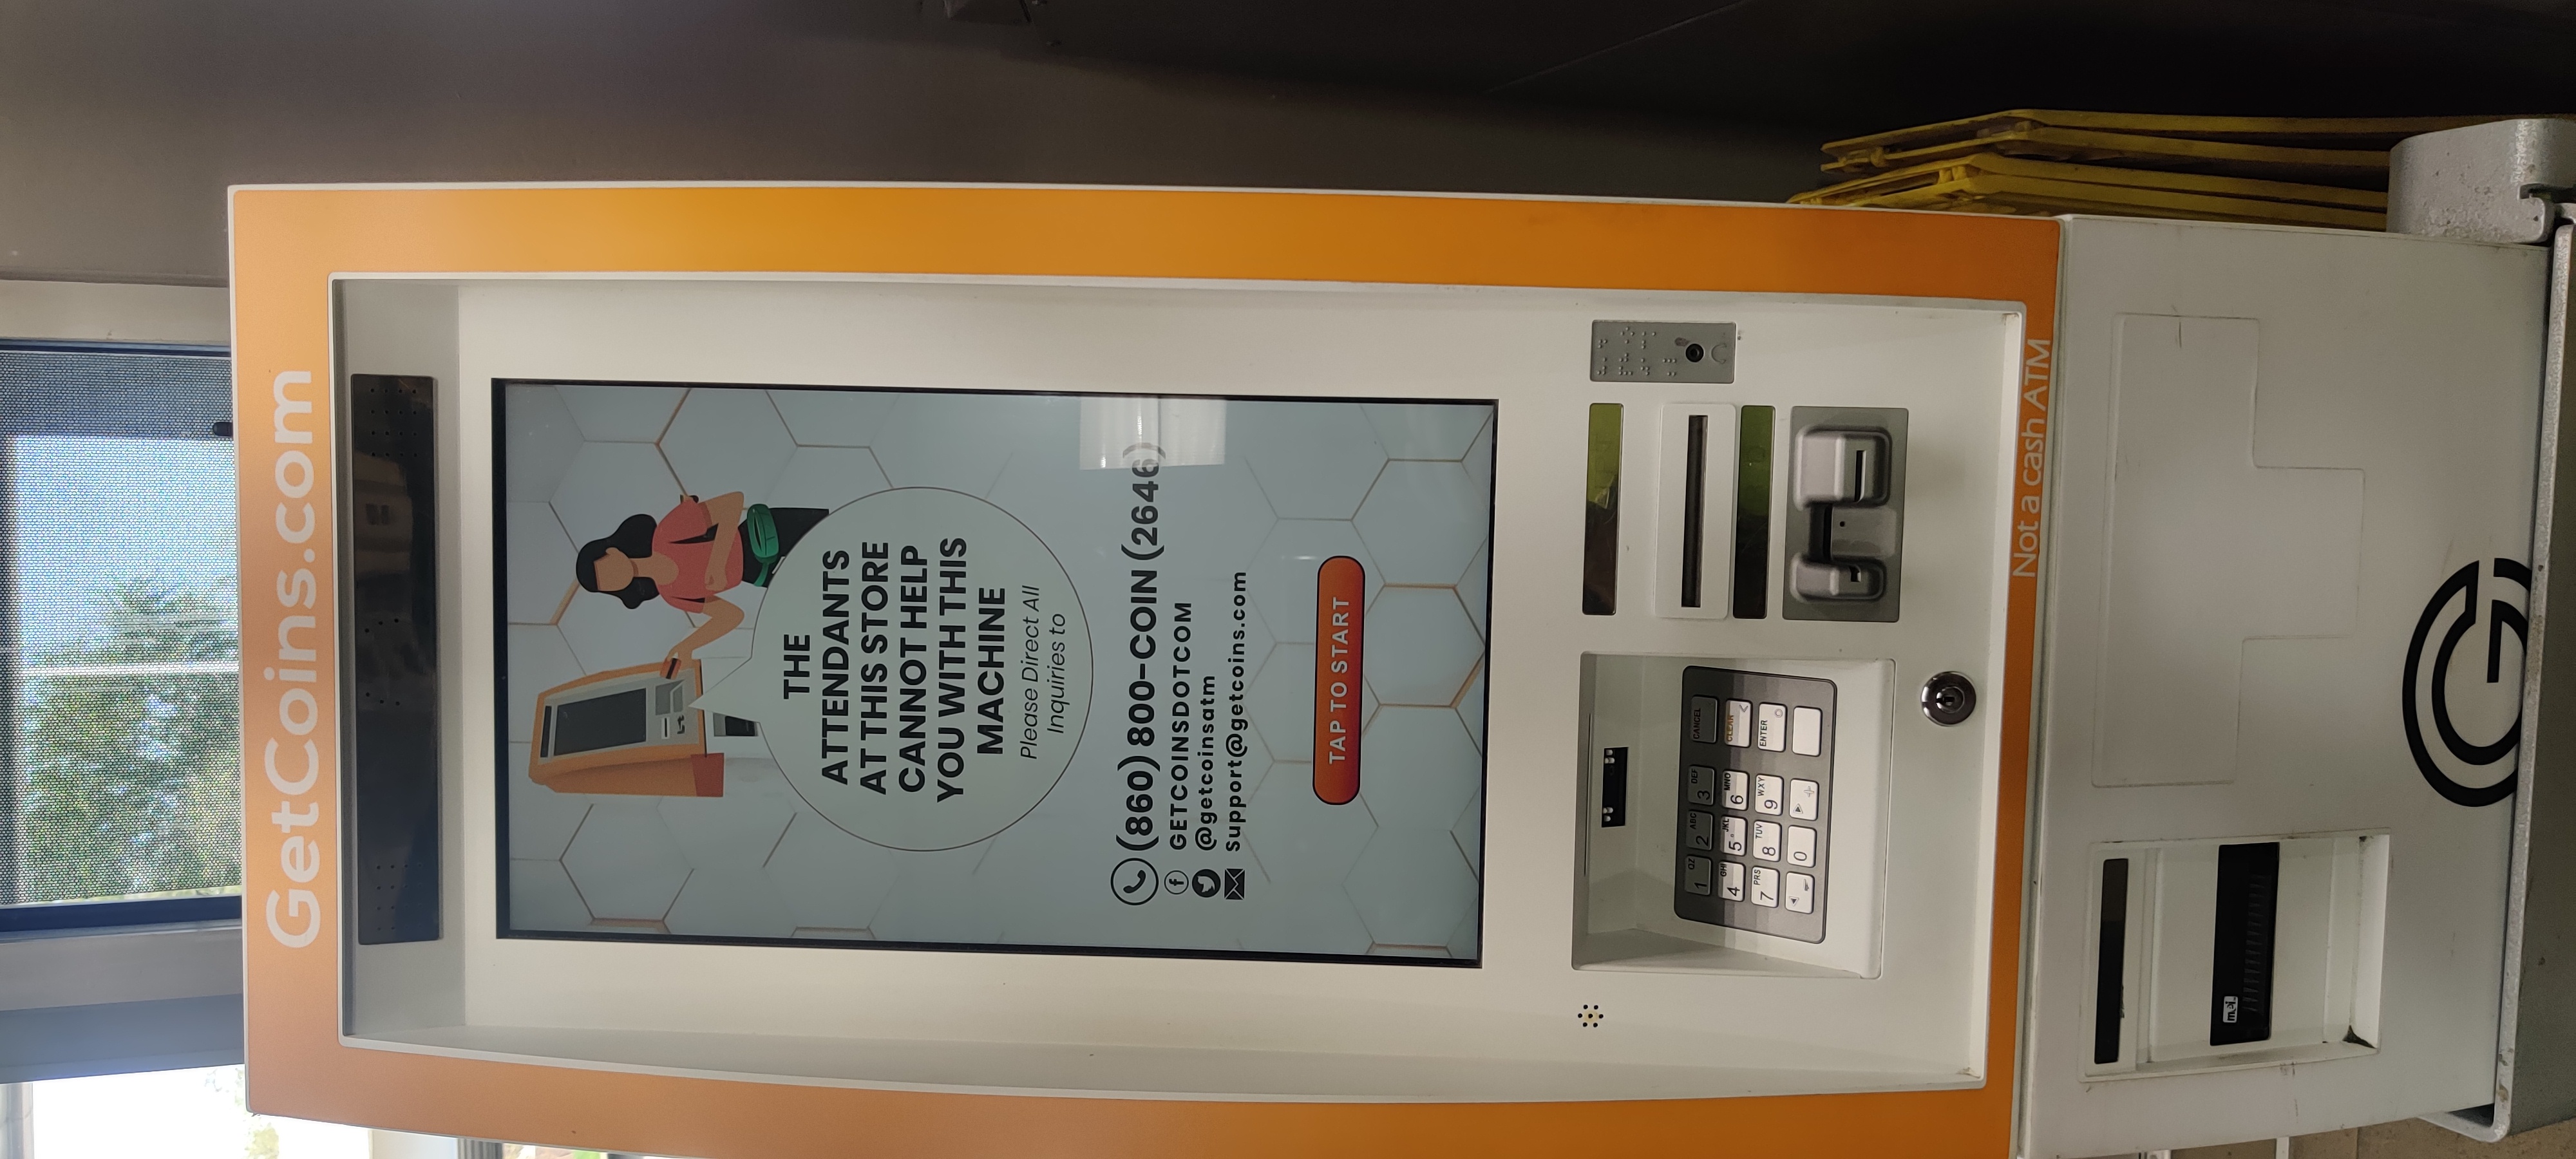 Getcoins - Bitcoin ATM - Inside of Marathon in Redford Charter Twp, Michigan